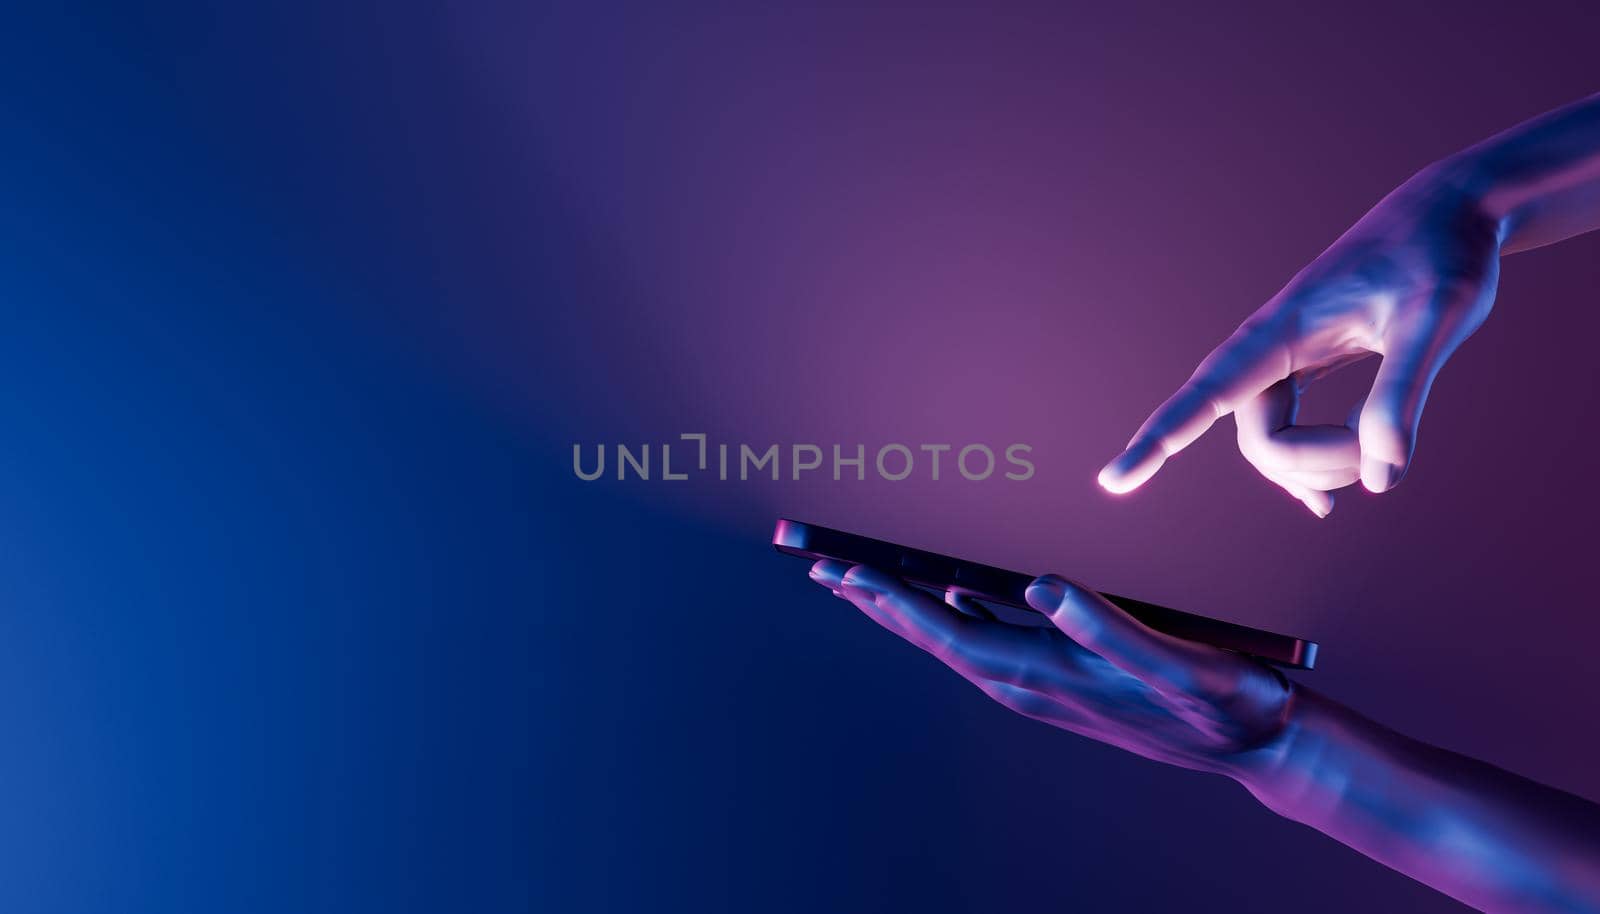 3D hands holding a smartphone and pointing at it by asolano